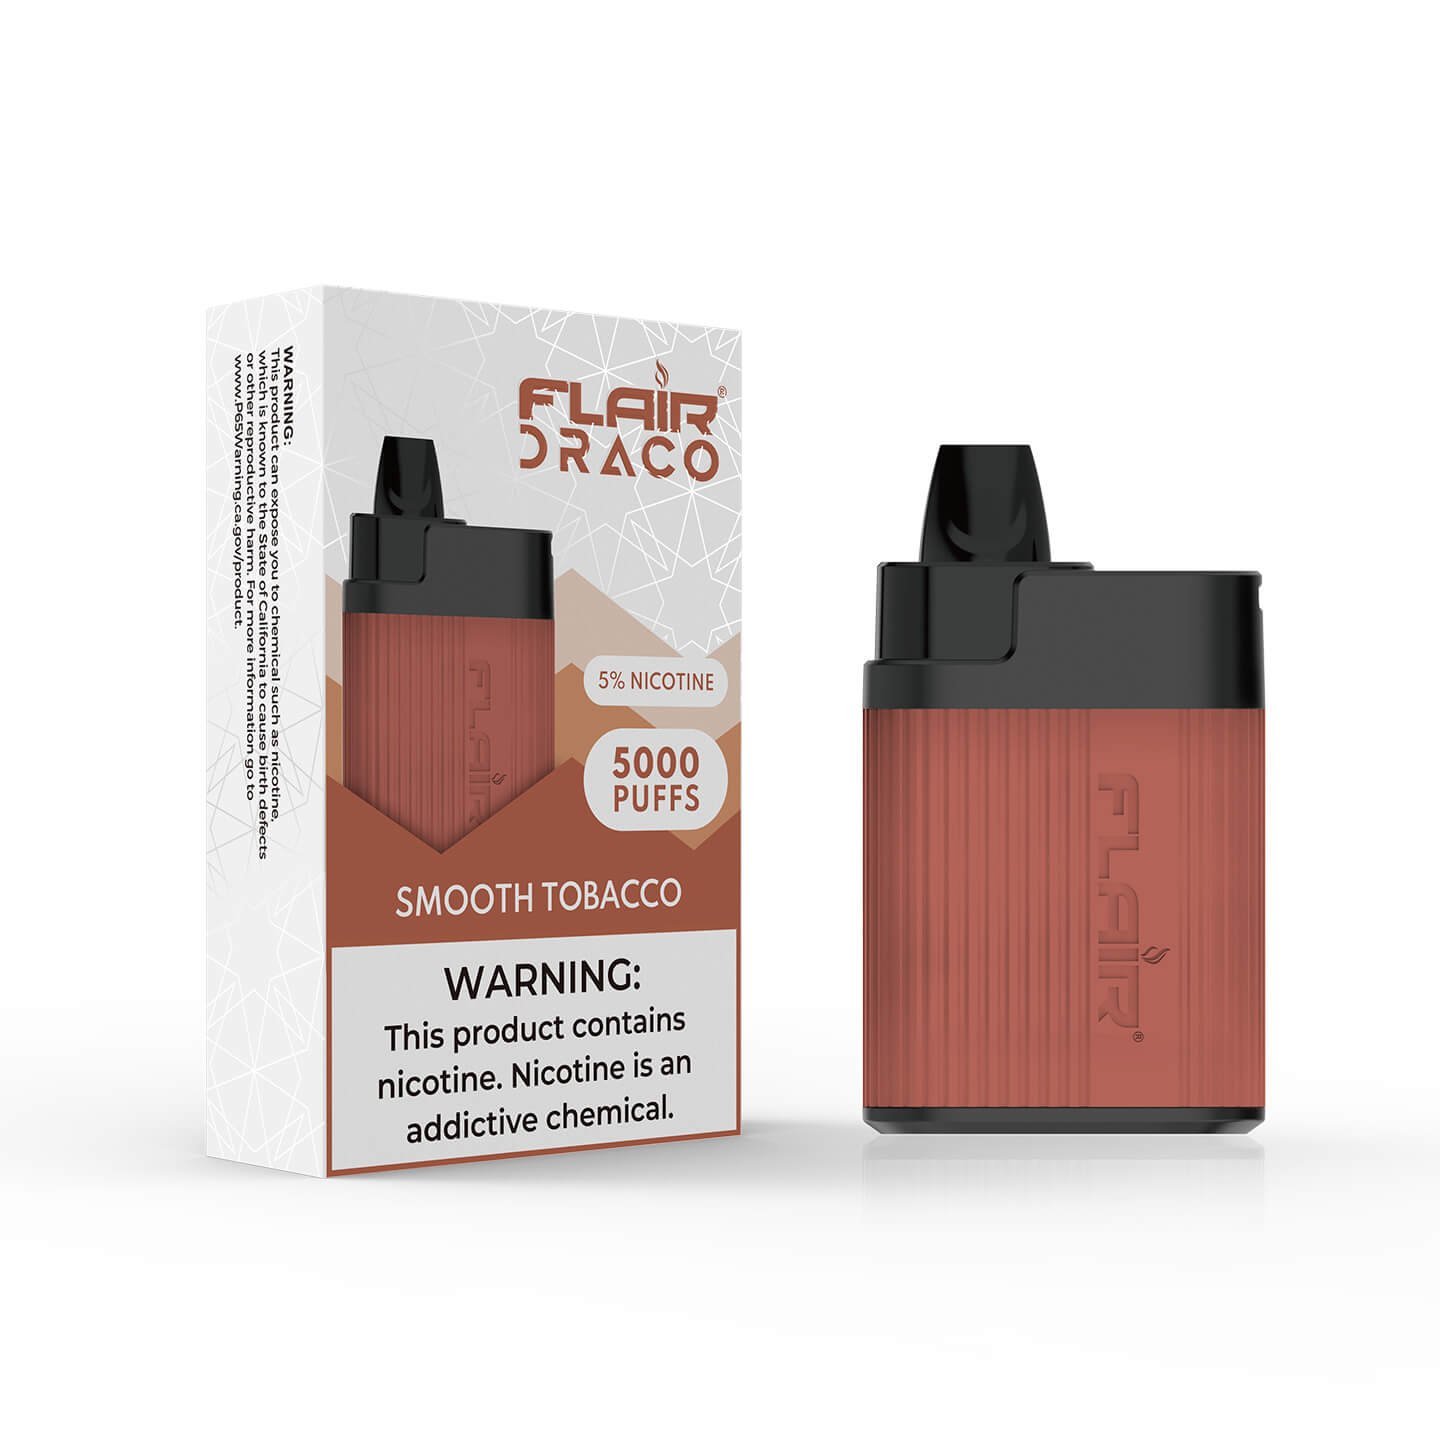 Flair Draco Disposable Device (Smooth Tobacco - 5000 Puffs)